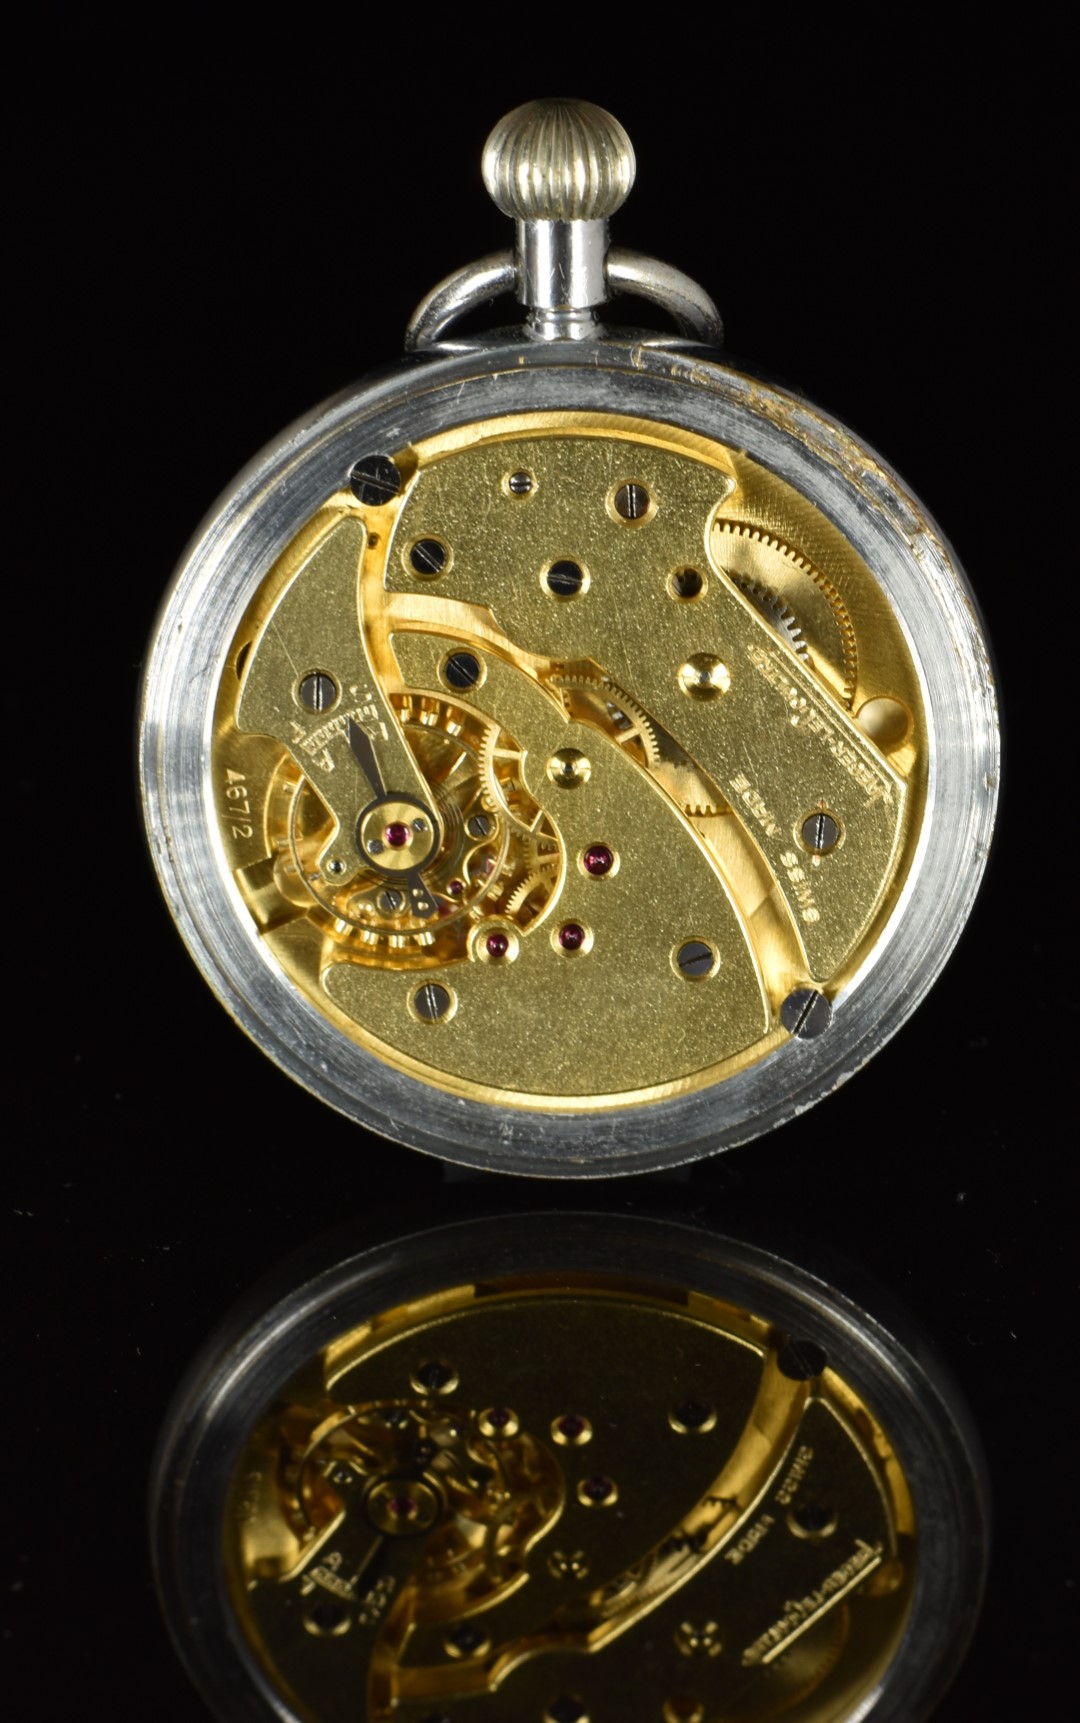 Jaeger LeCoultre keyless winding open faced military pocket watch with inset subsidiary seconds - Image 3 of 3